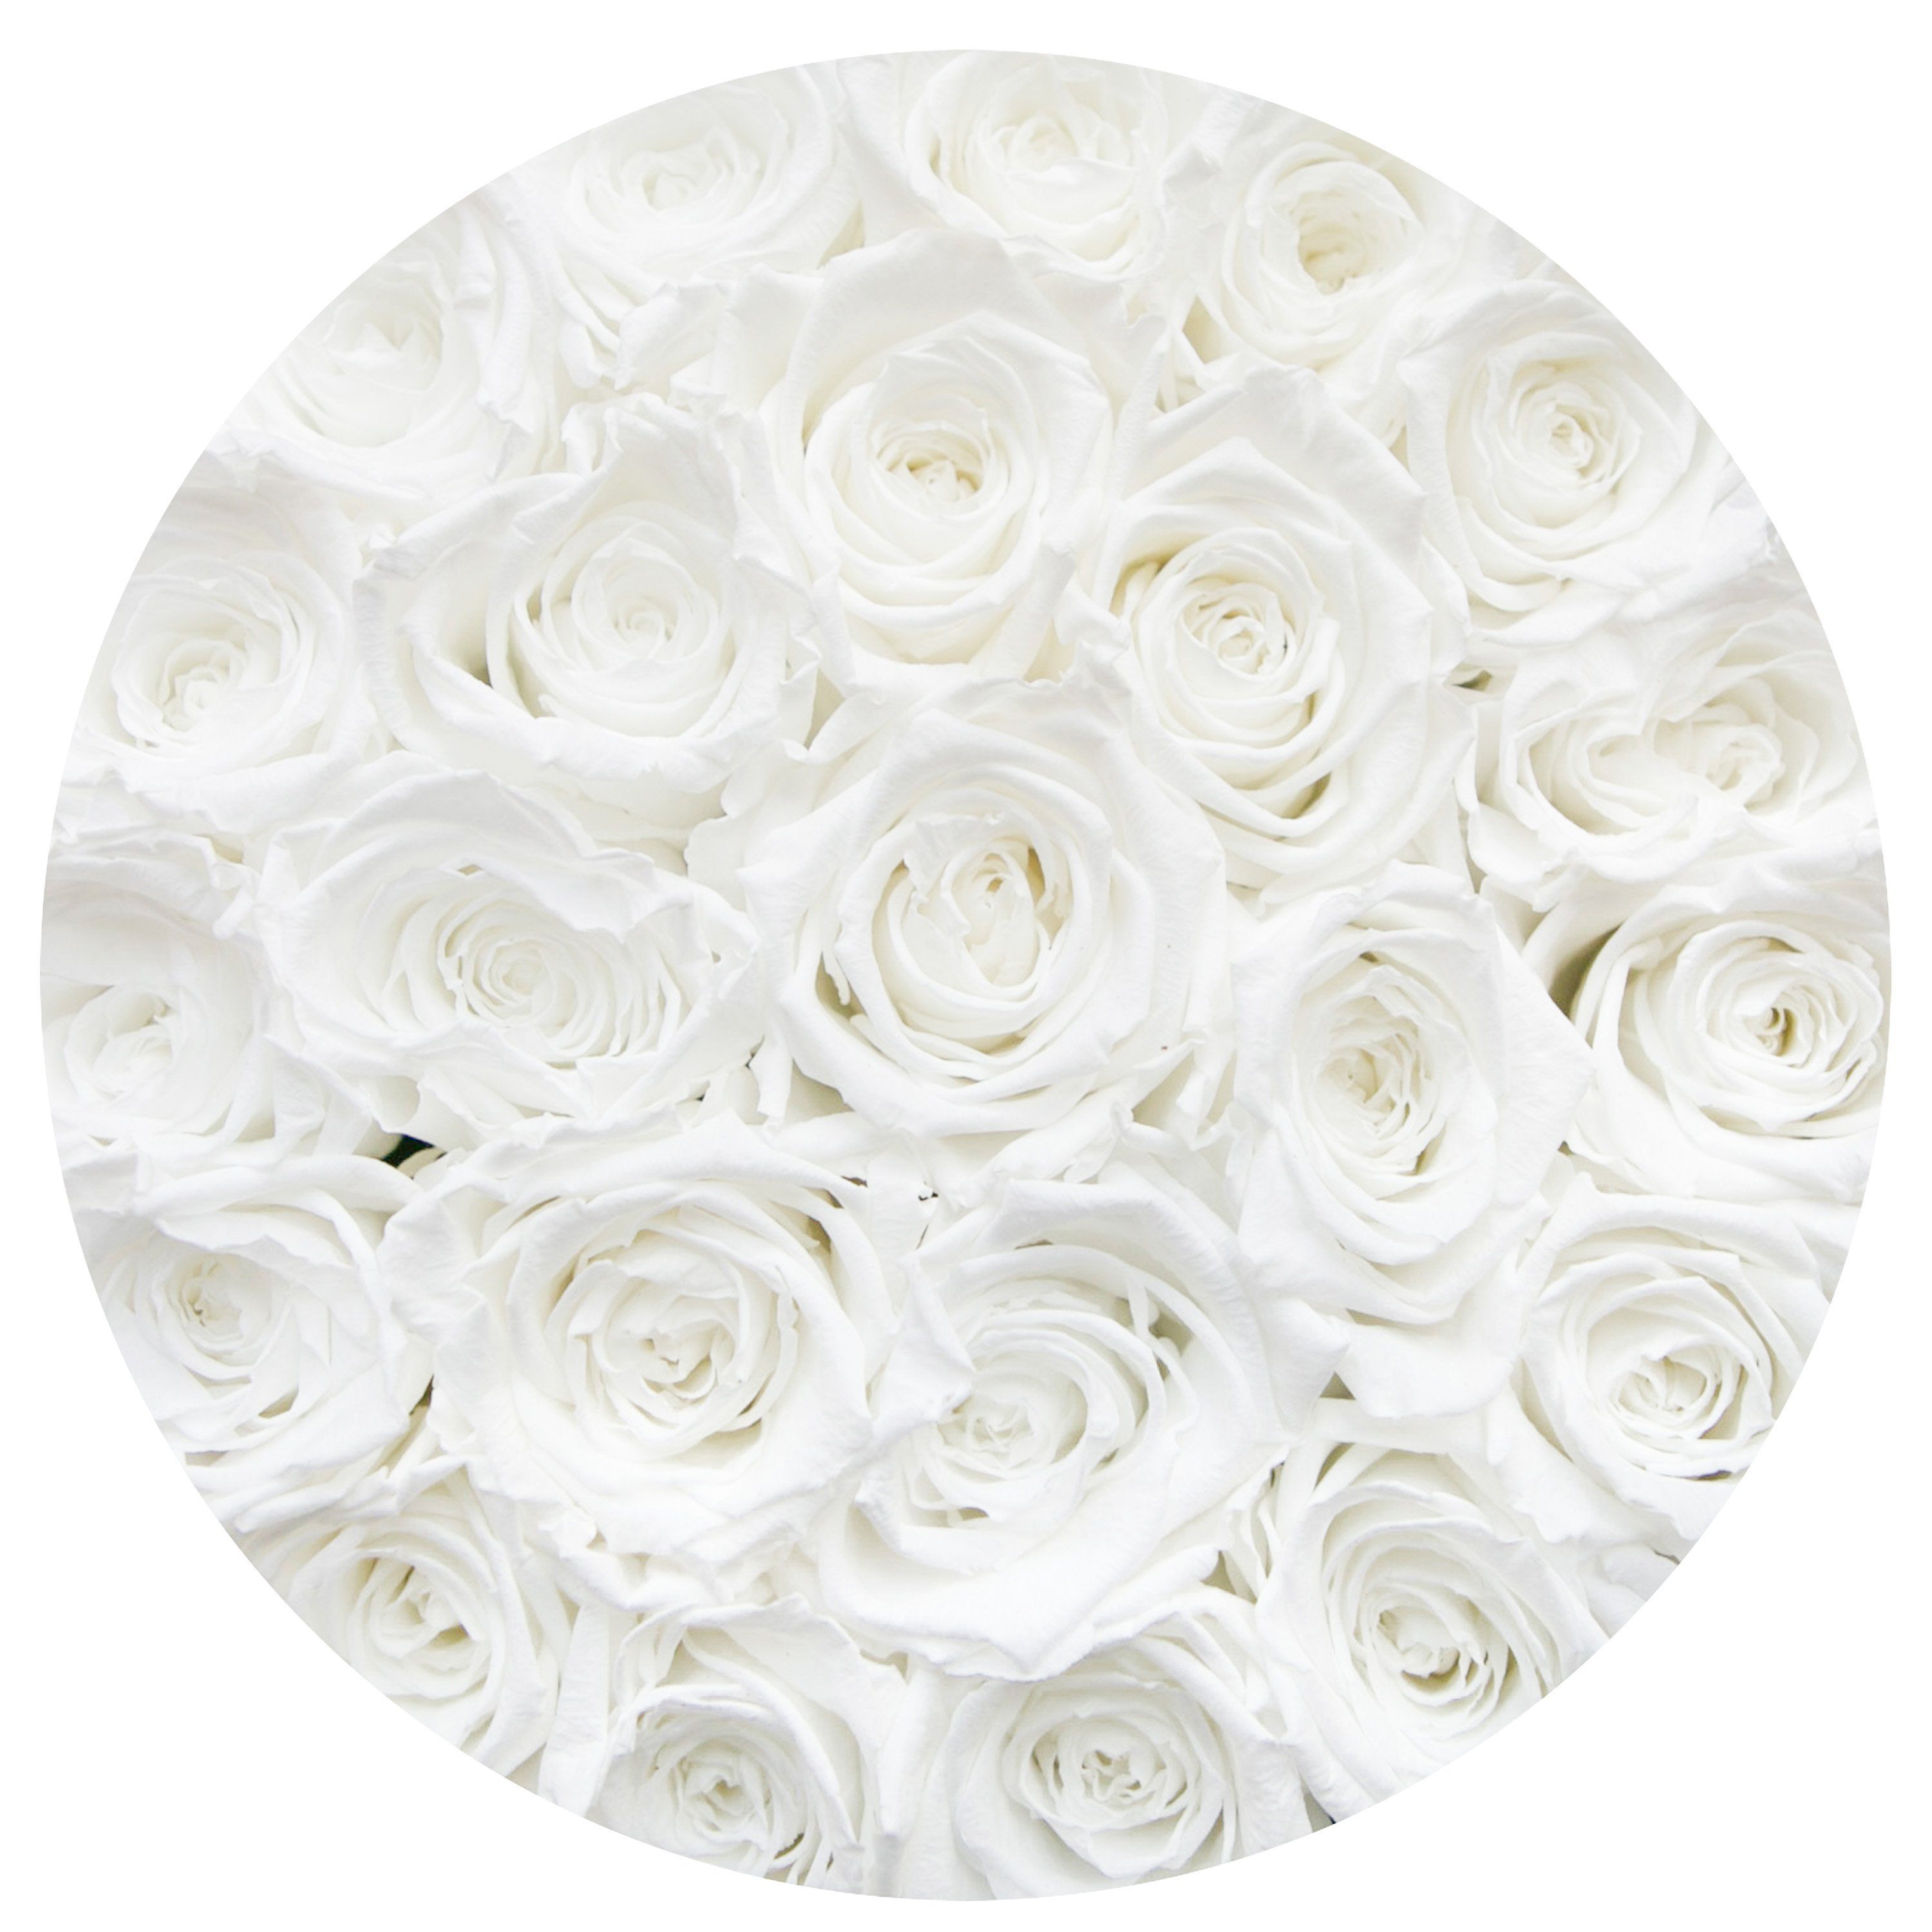 classic round box - royal-blue suede box - white roses white eternity roses - the million roses